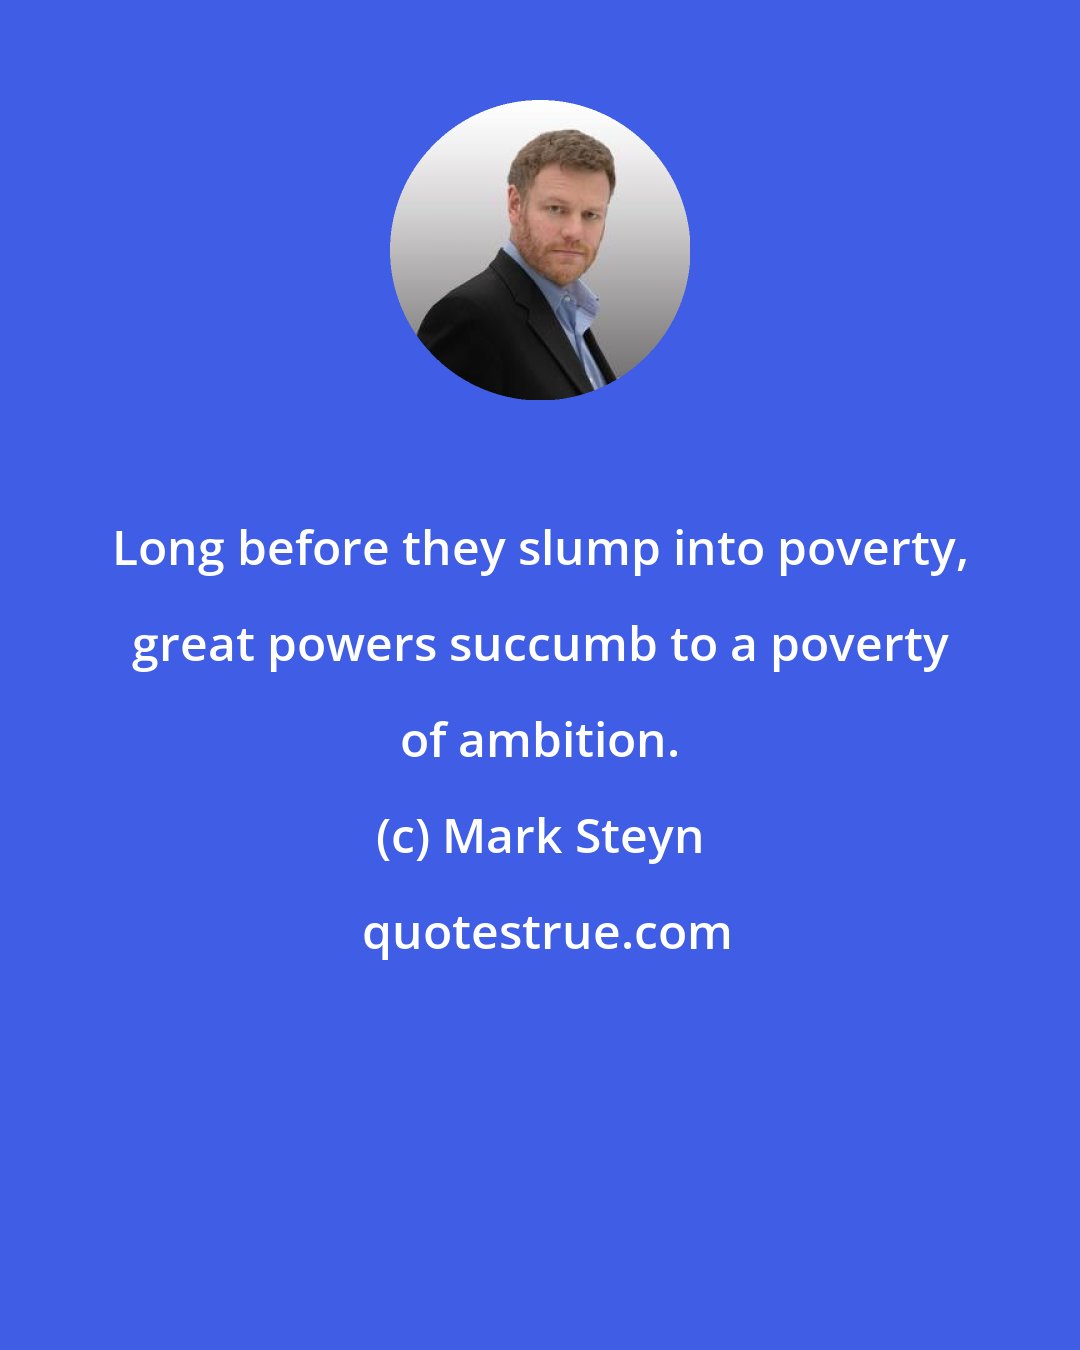 Mark Steyn: Long before they slump into poverty, great powers succumb to a poverty of ambition.